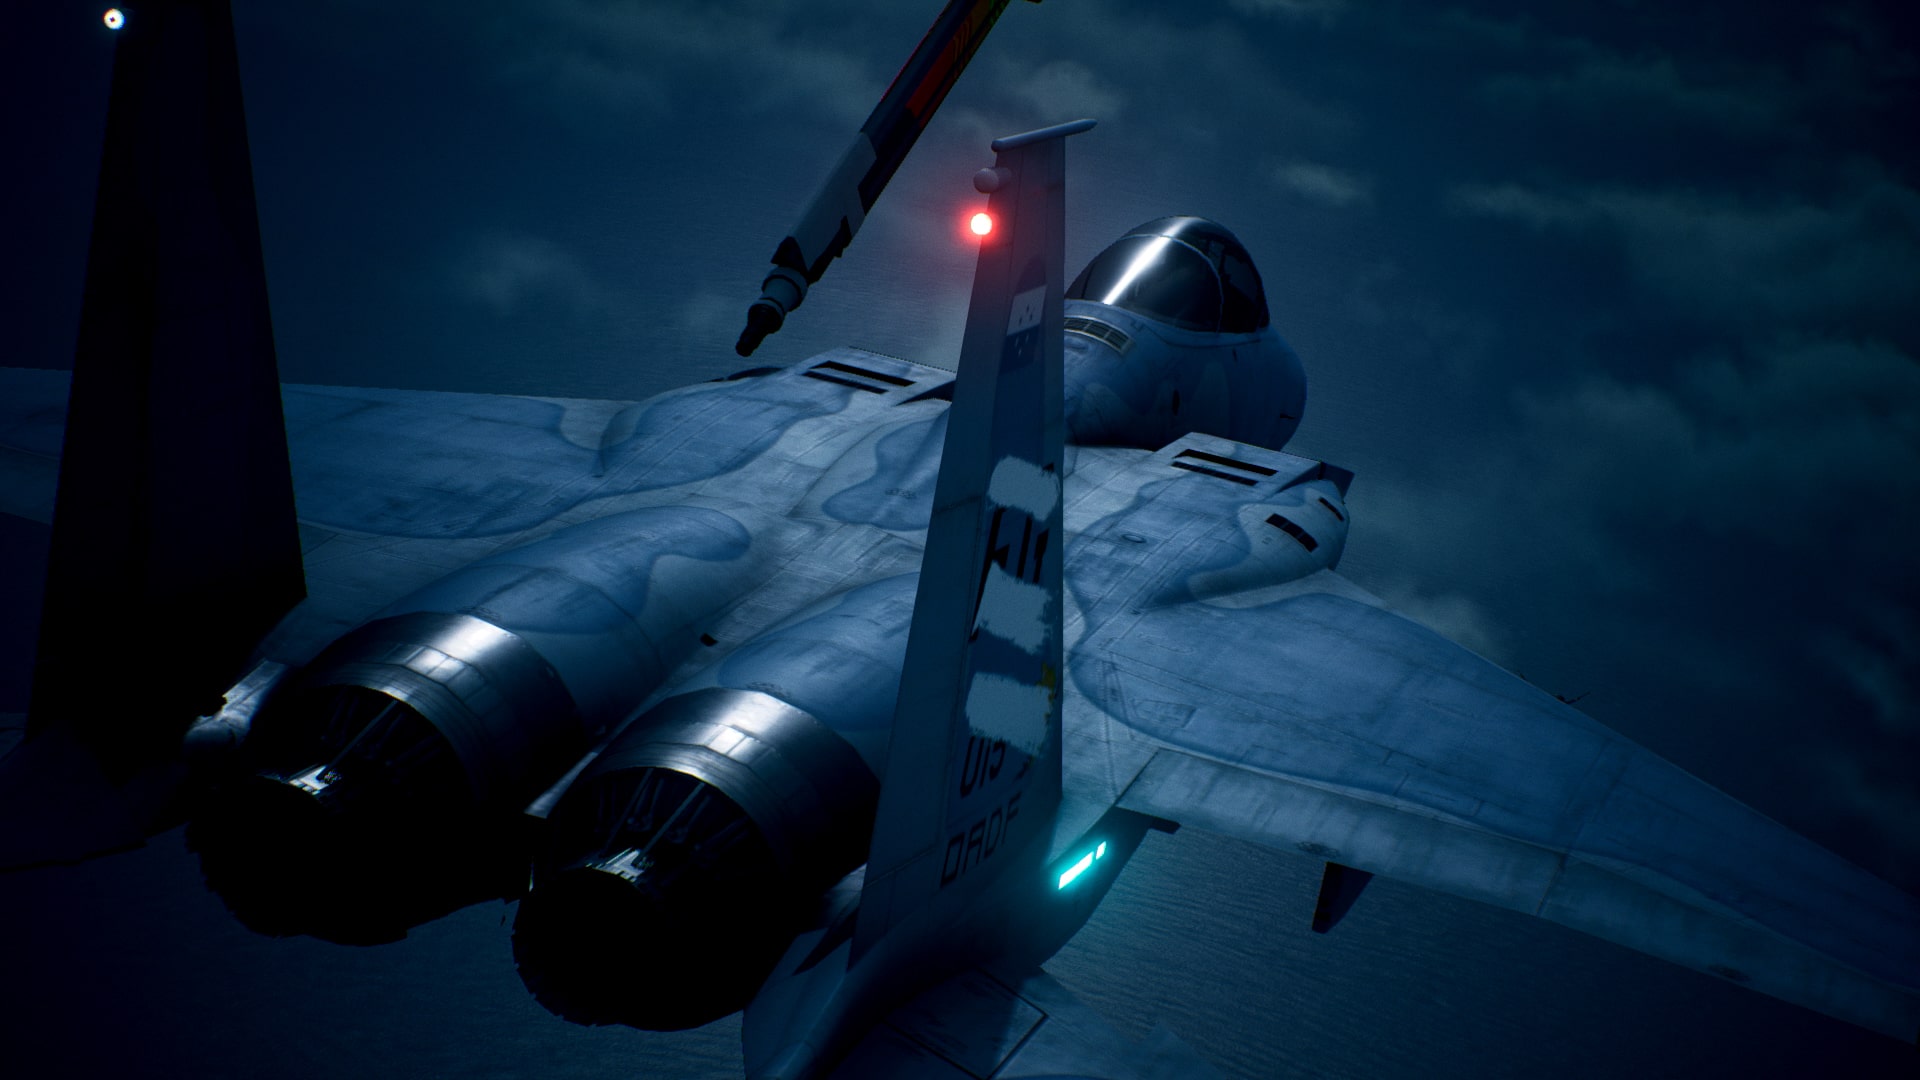 Ace Combat 7 Top Gun - Maverick DLC Review (PC): Does It Live Up to the  Hype of the Movie? - autoevolution